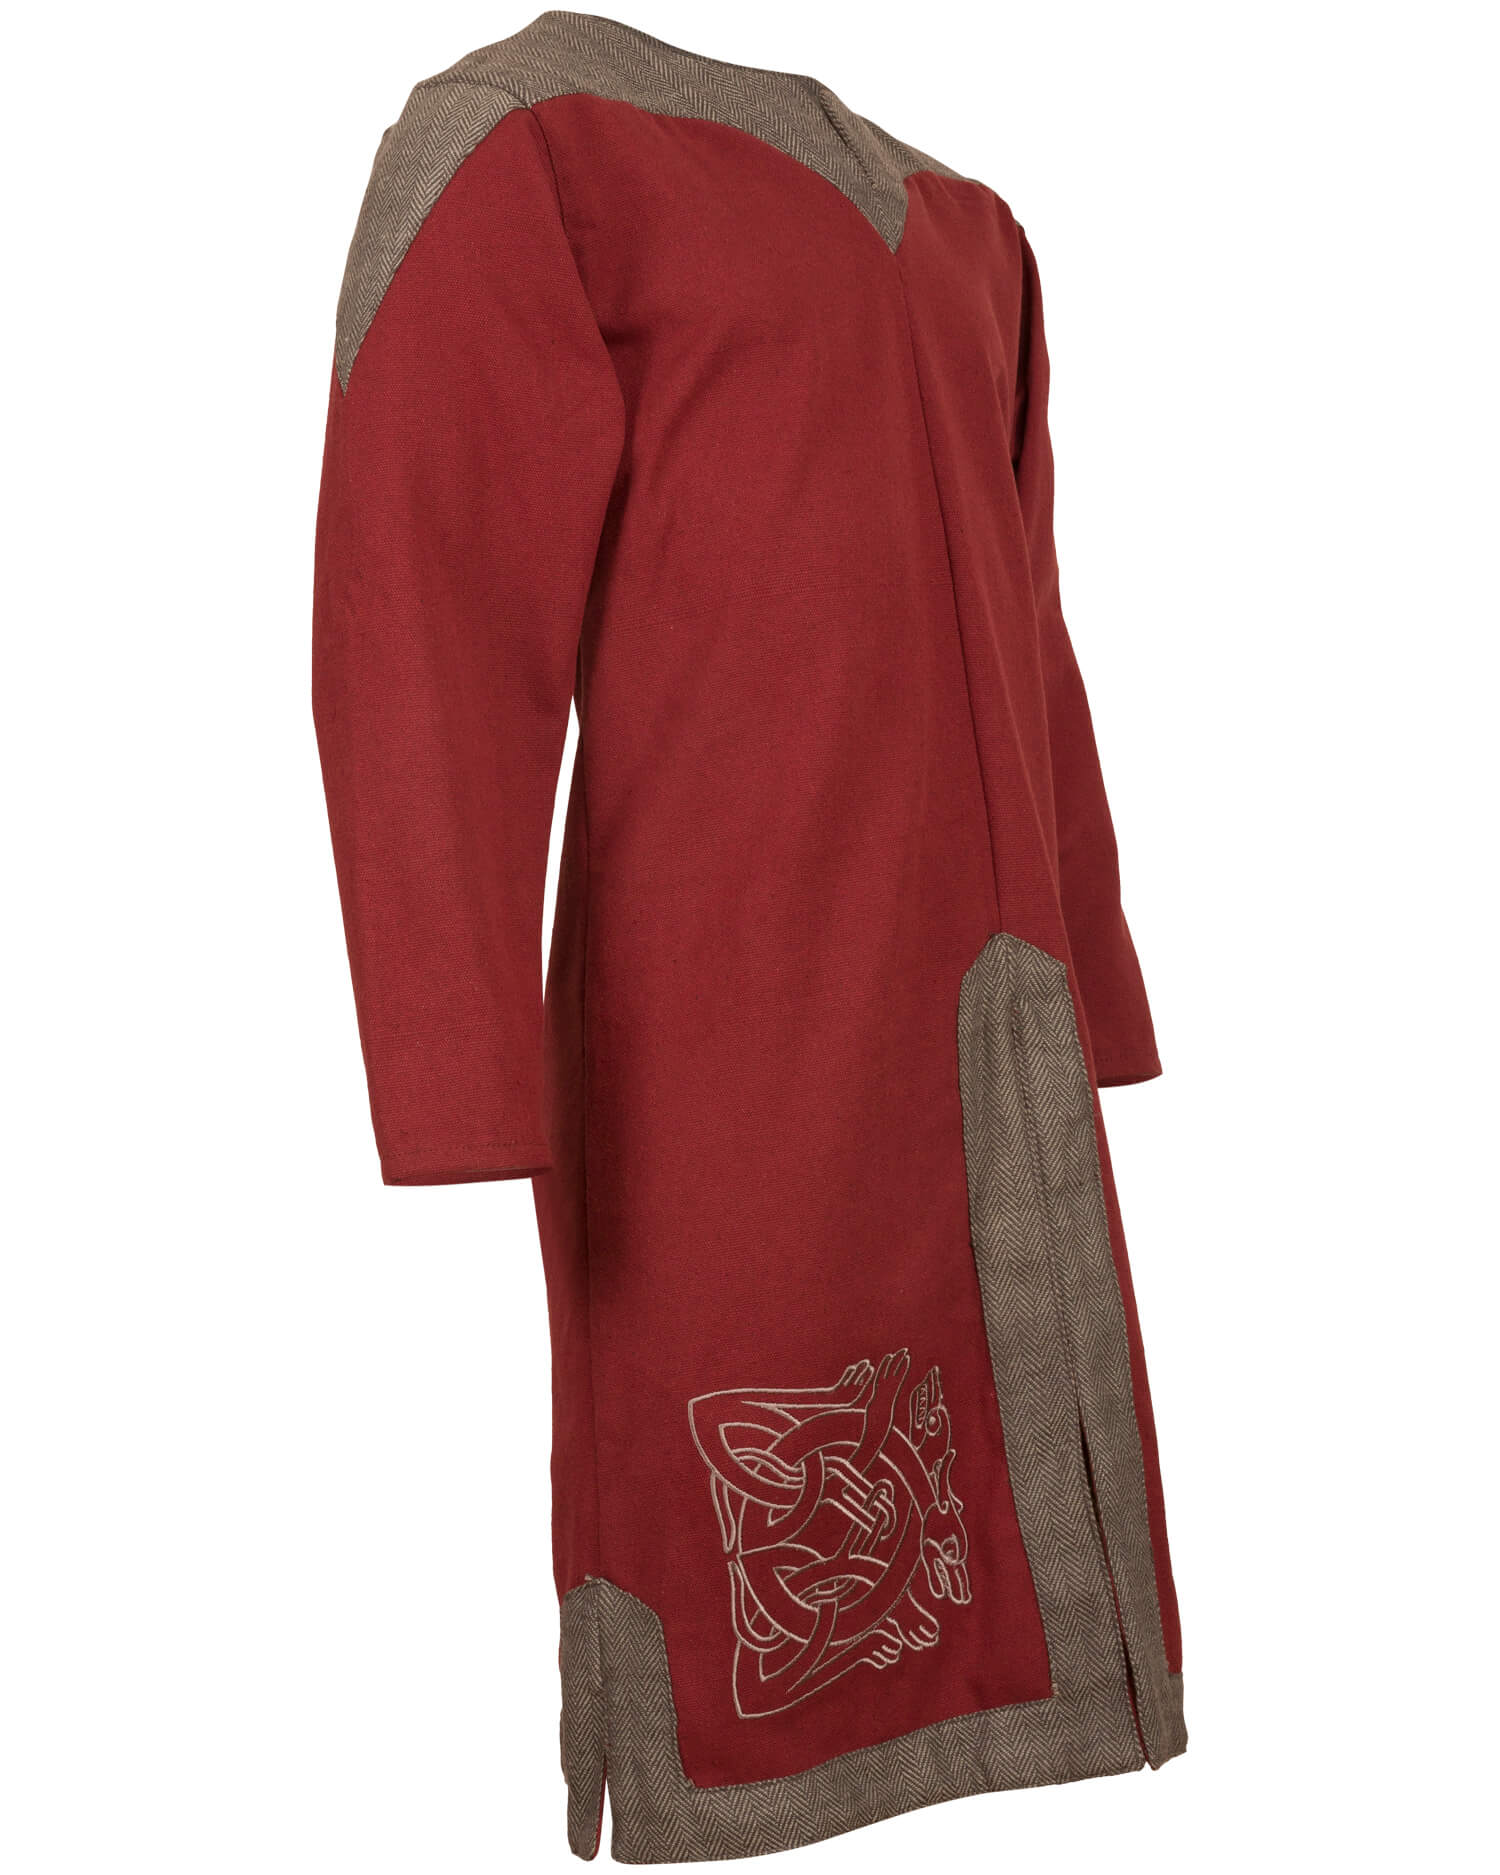 Norgaard tunic embroided canvas